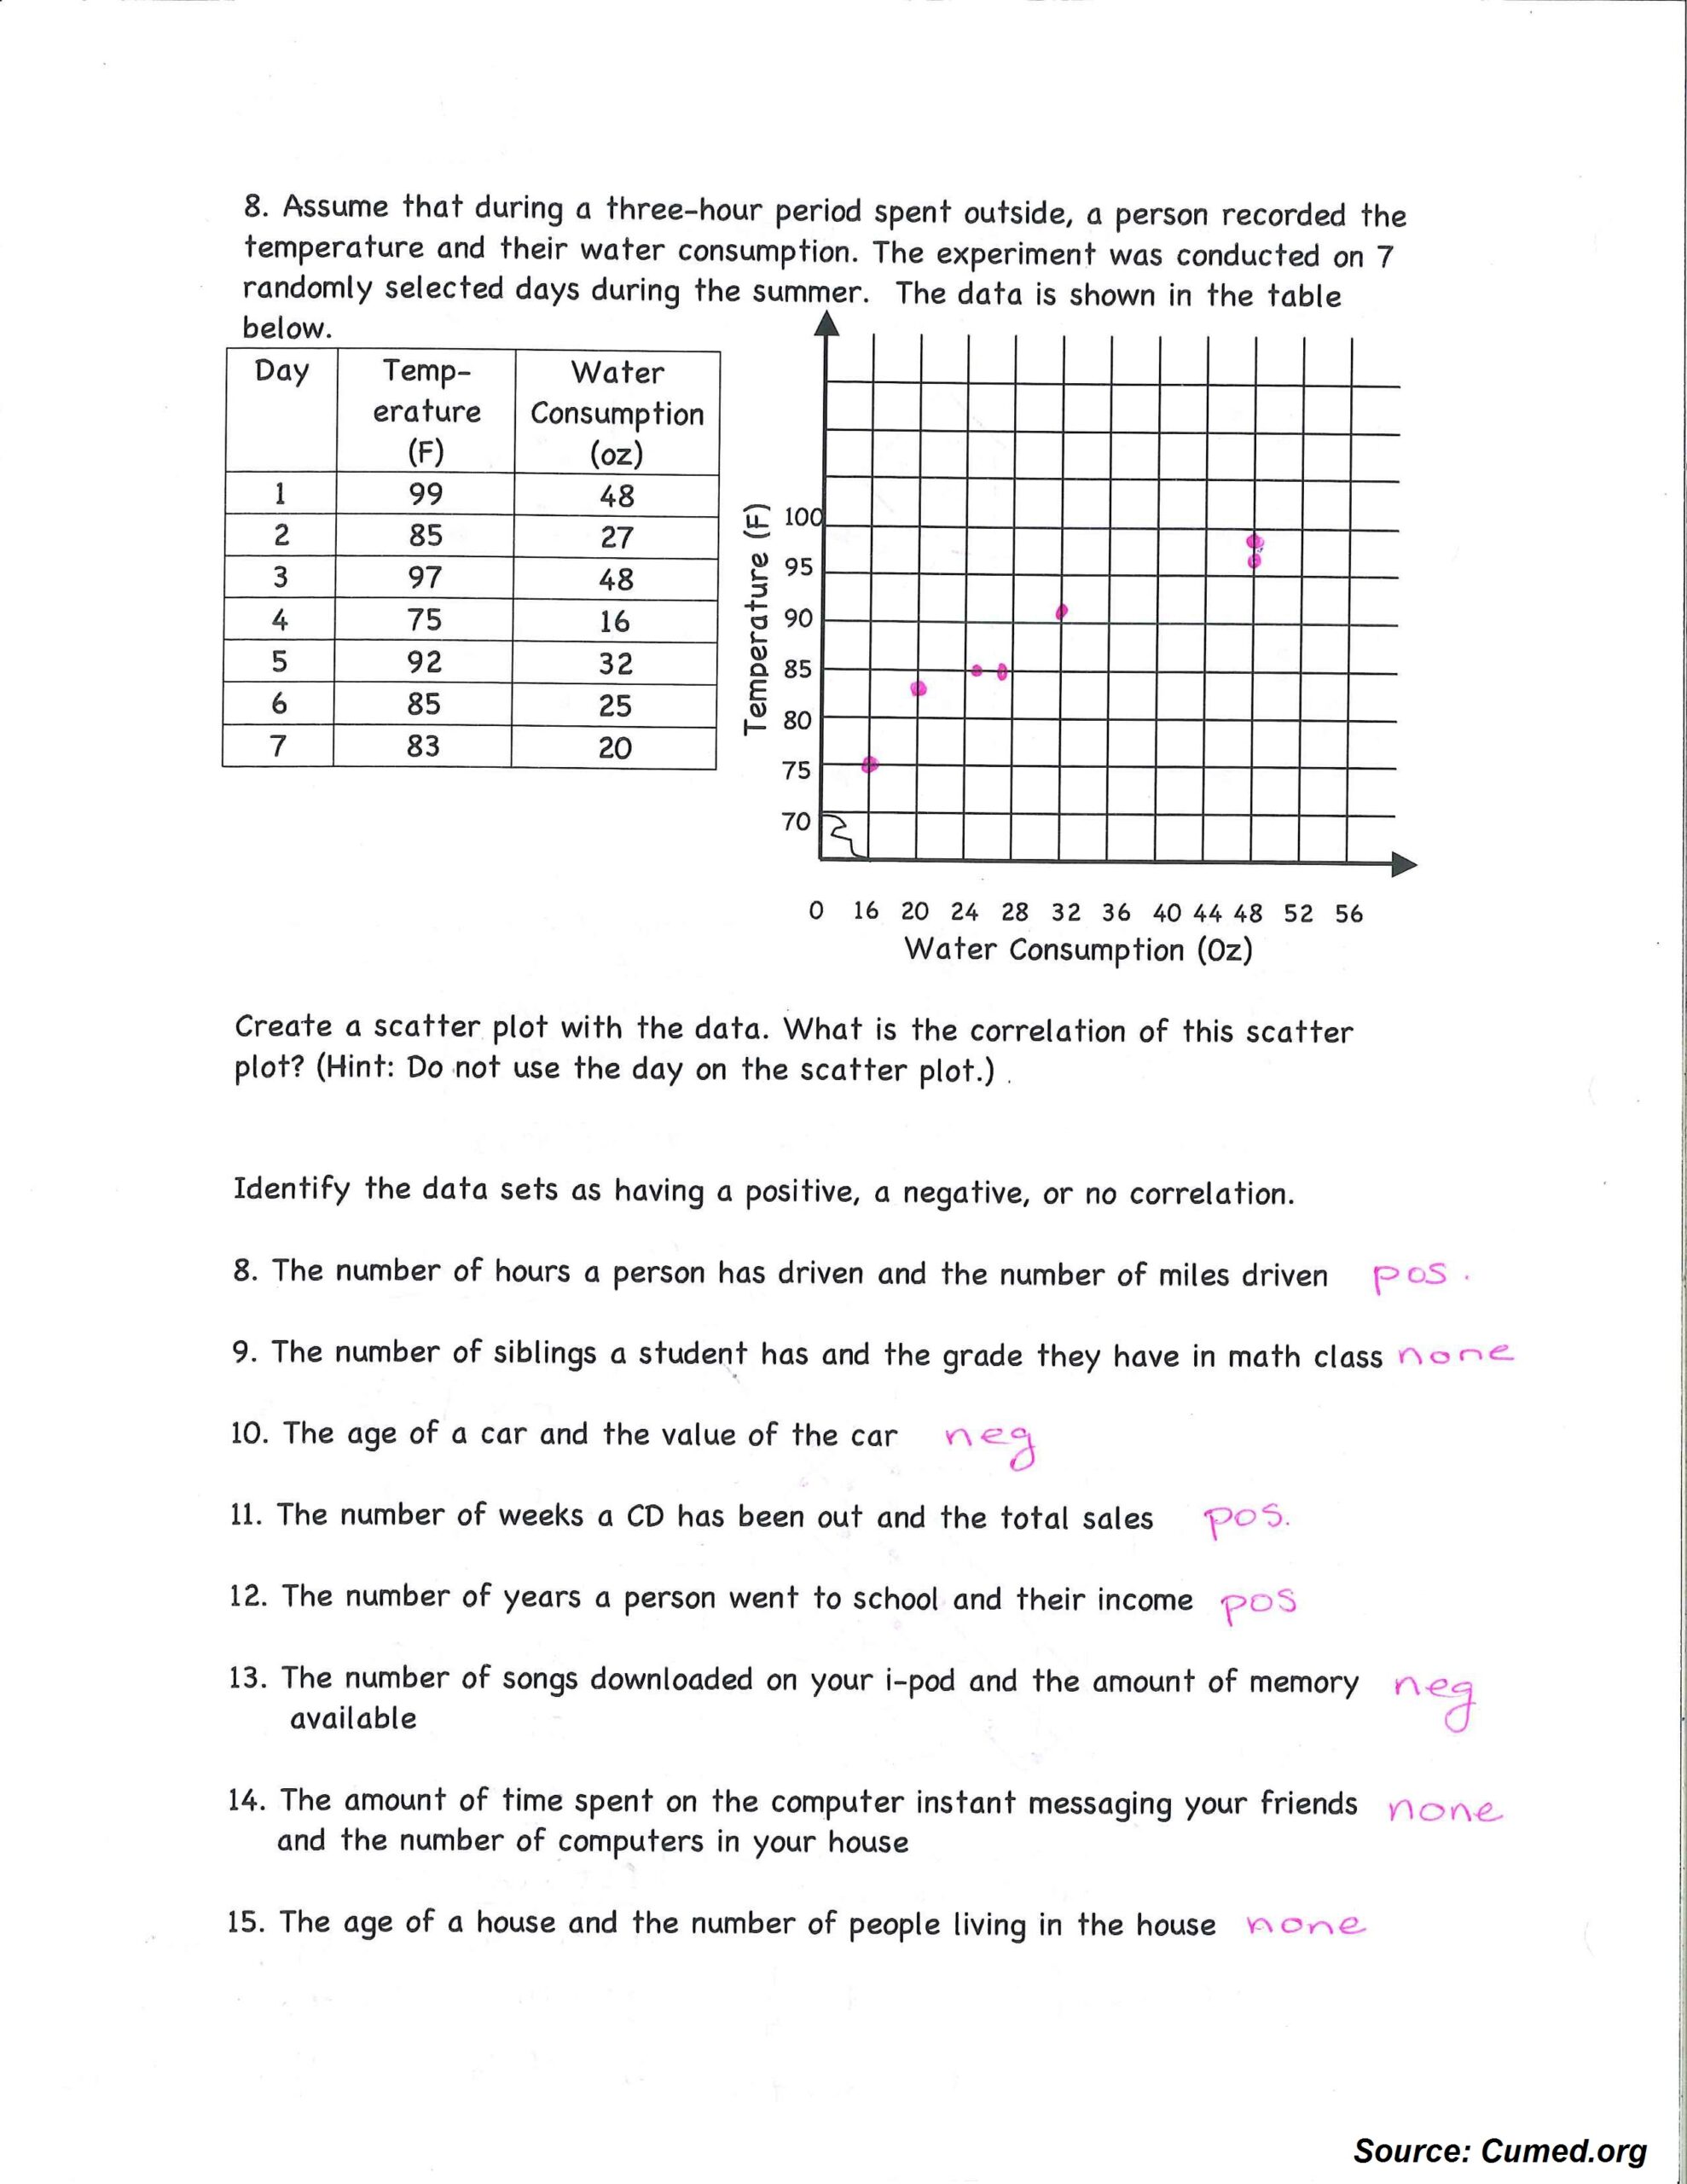 Scatter Plot Worksheet With Answers